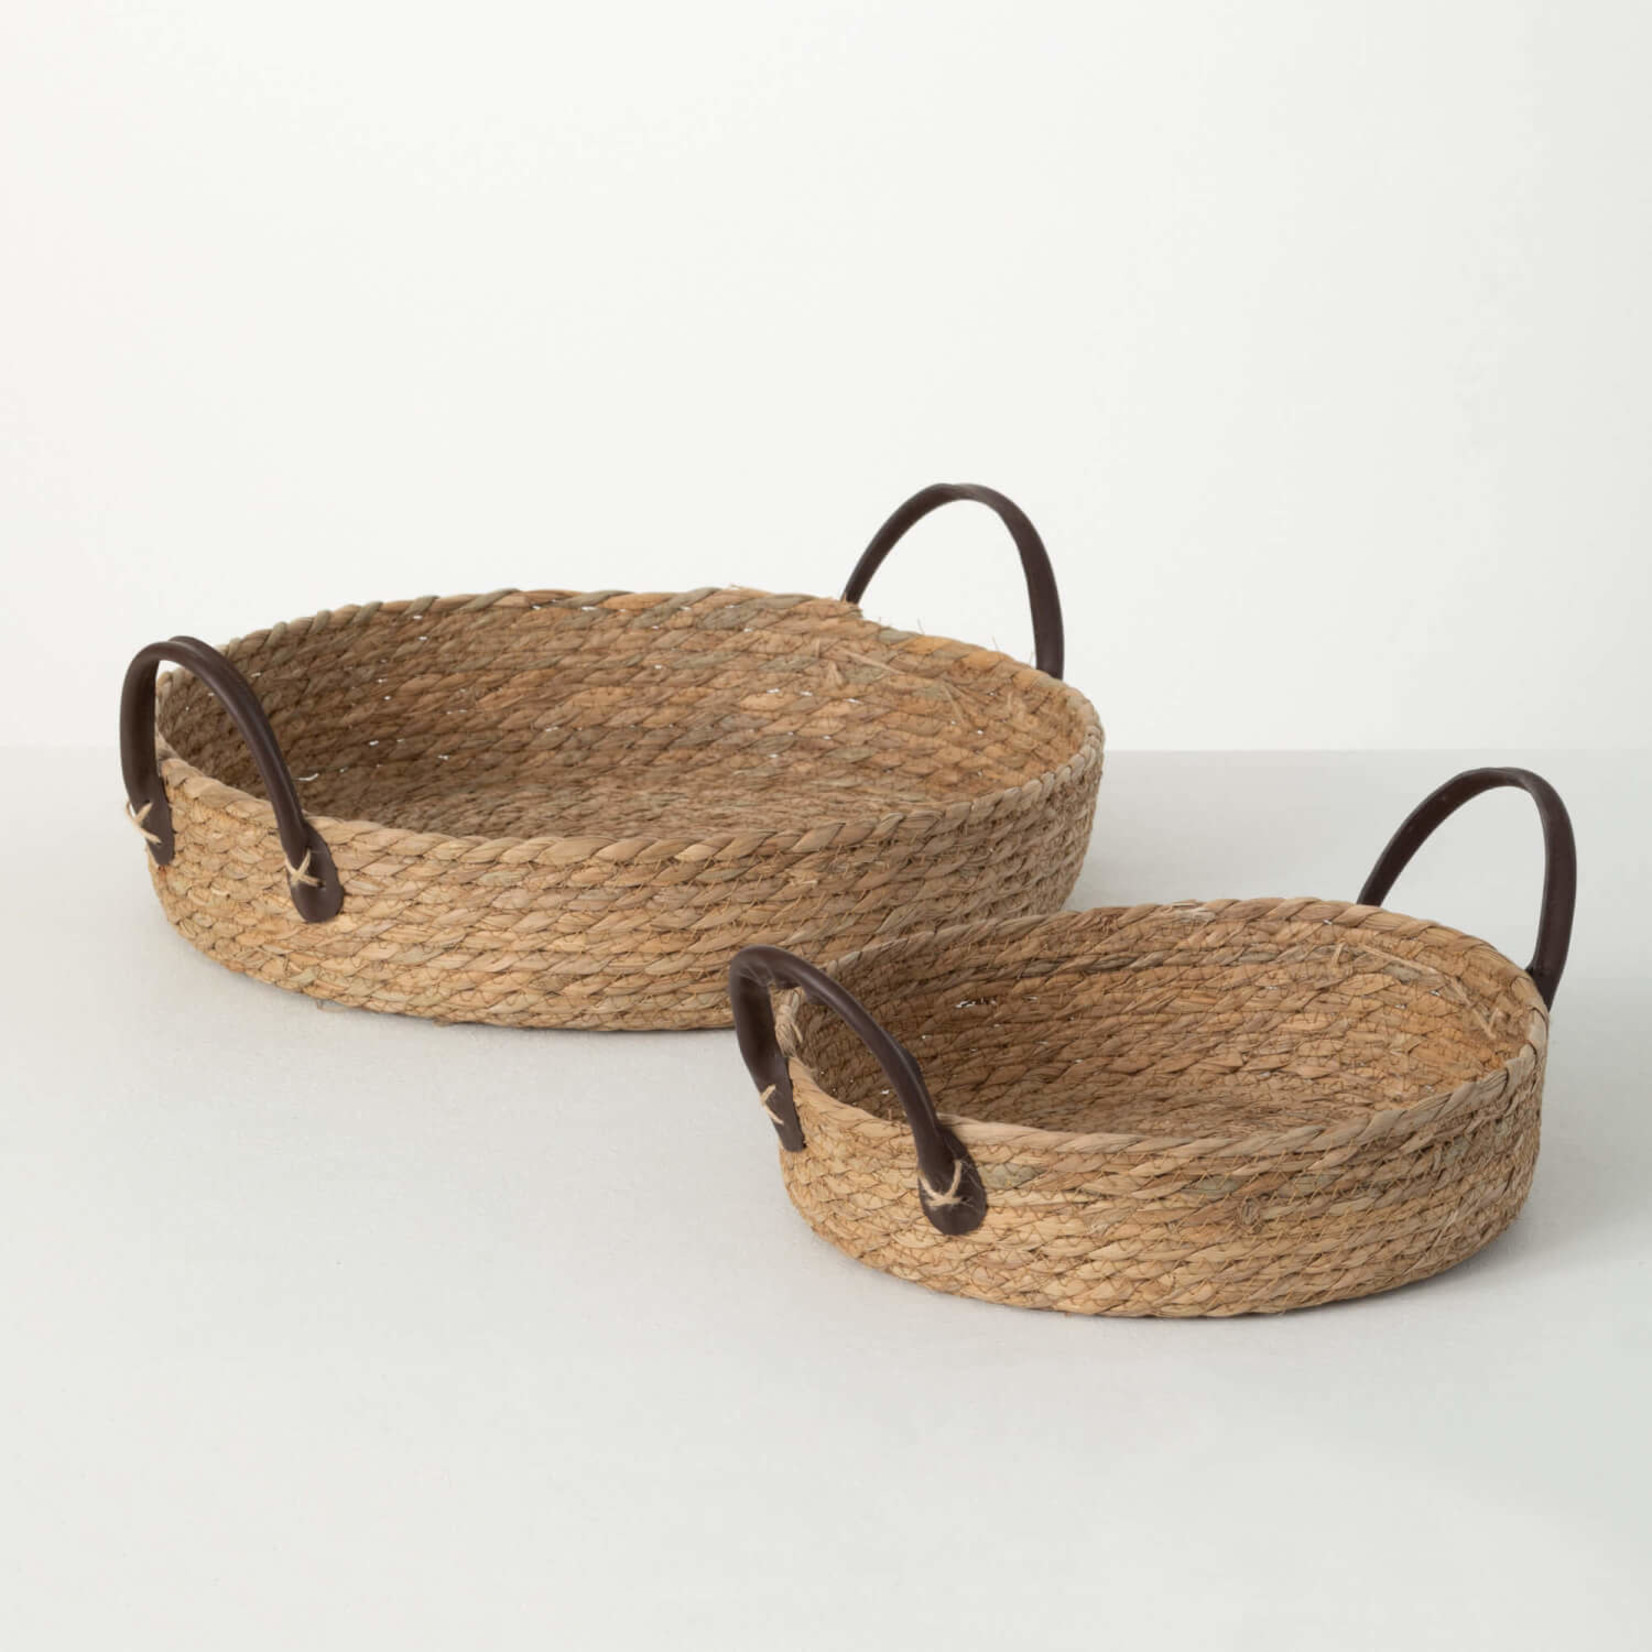 Woven Wicker Tray with Handle, Natural